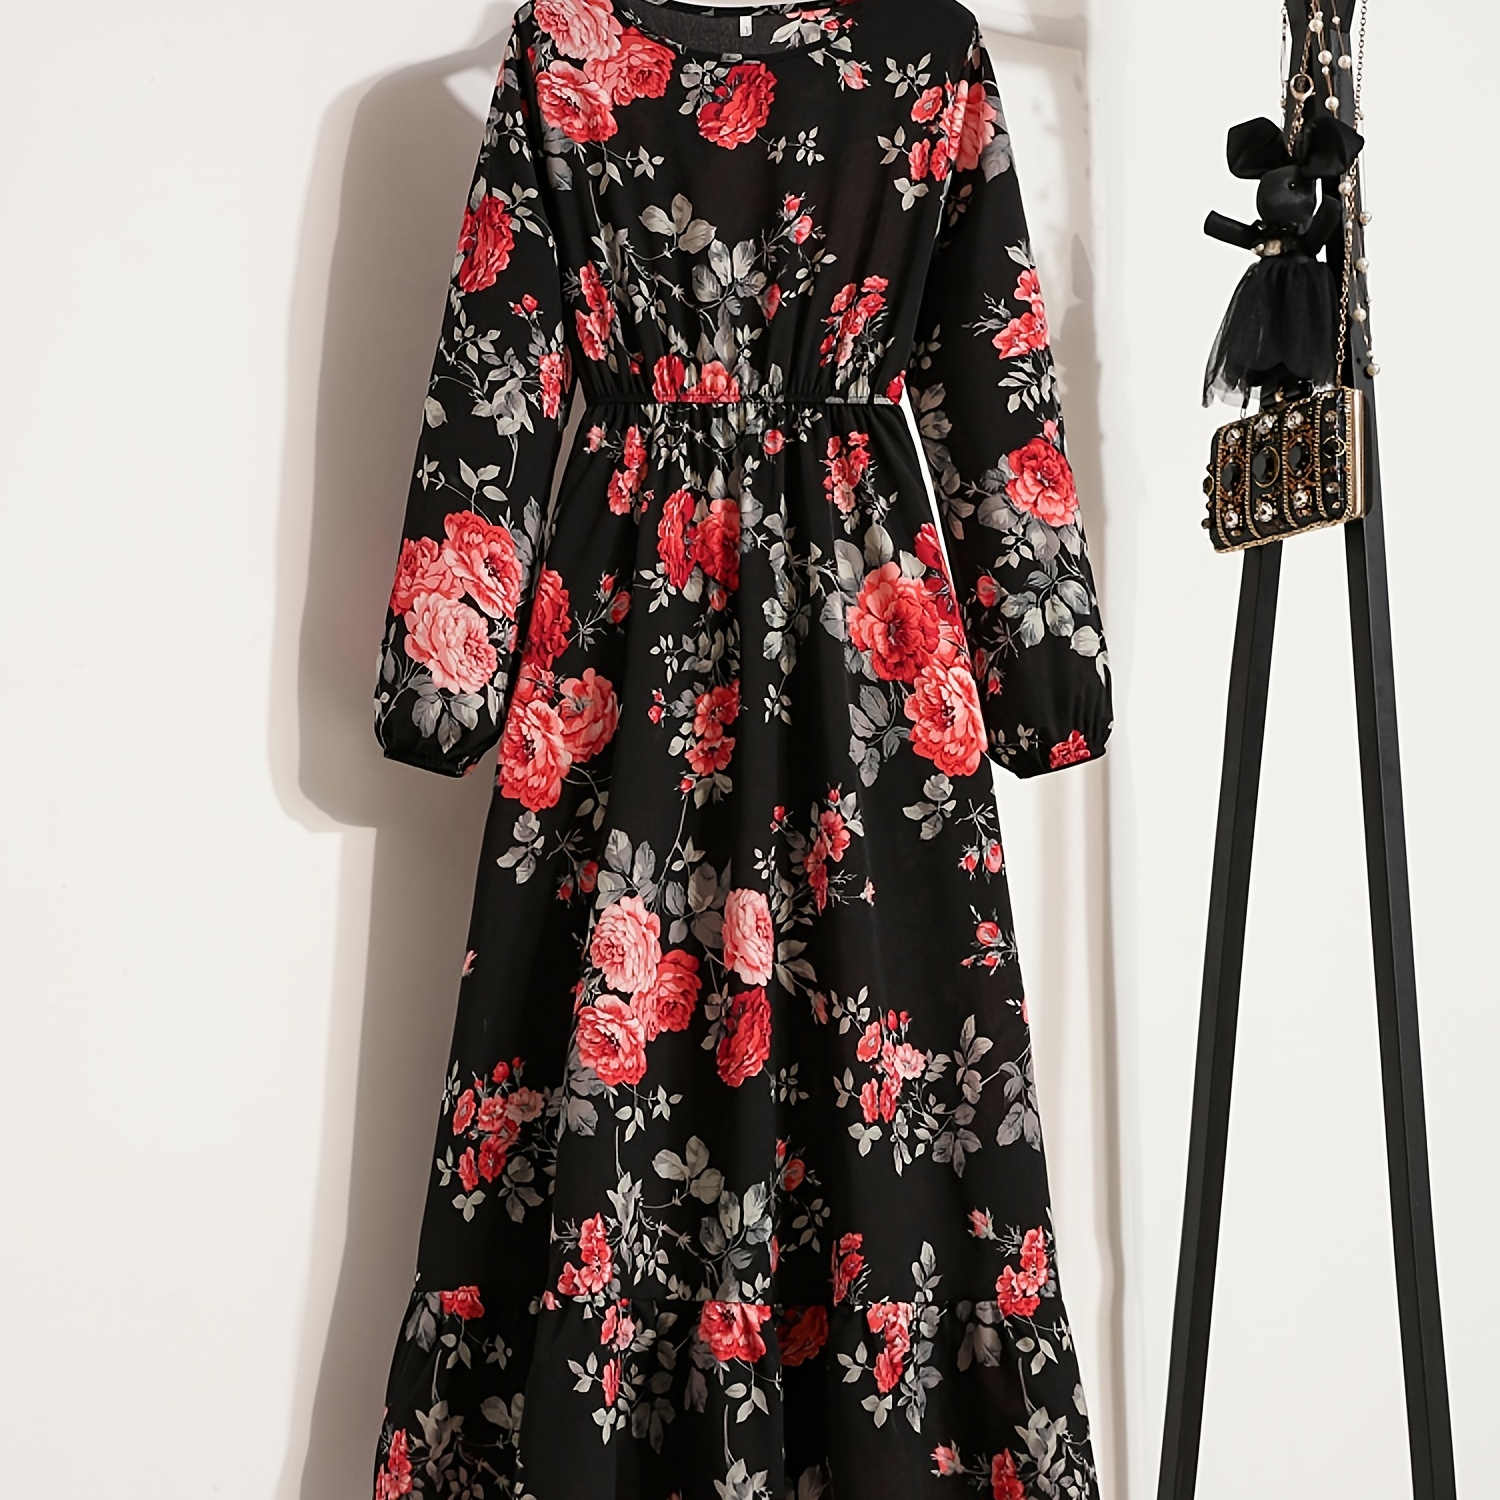 

Floral Retro Tunic Round Neck Dress, Long Sleeve High Waist Maxi Party Dress, Women's Clothing